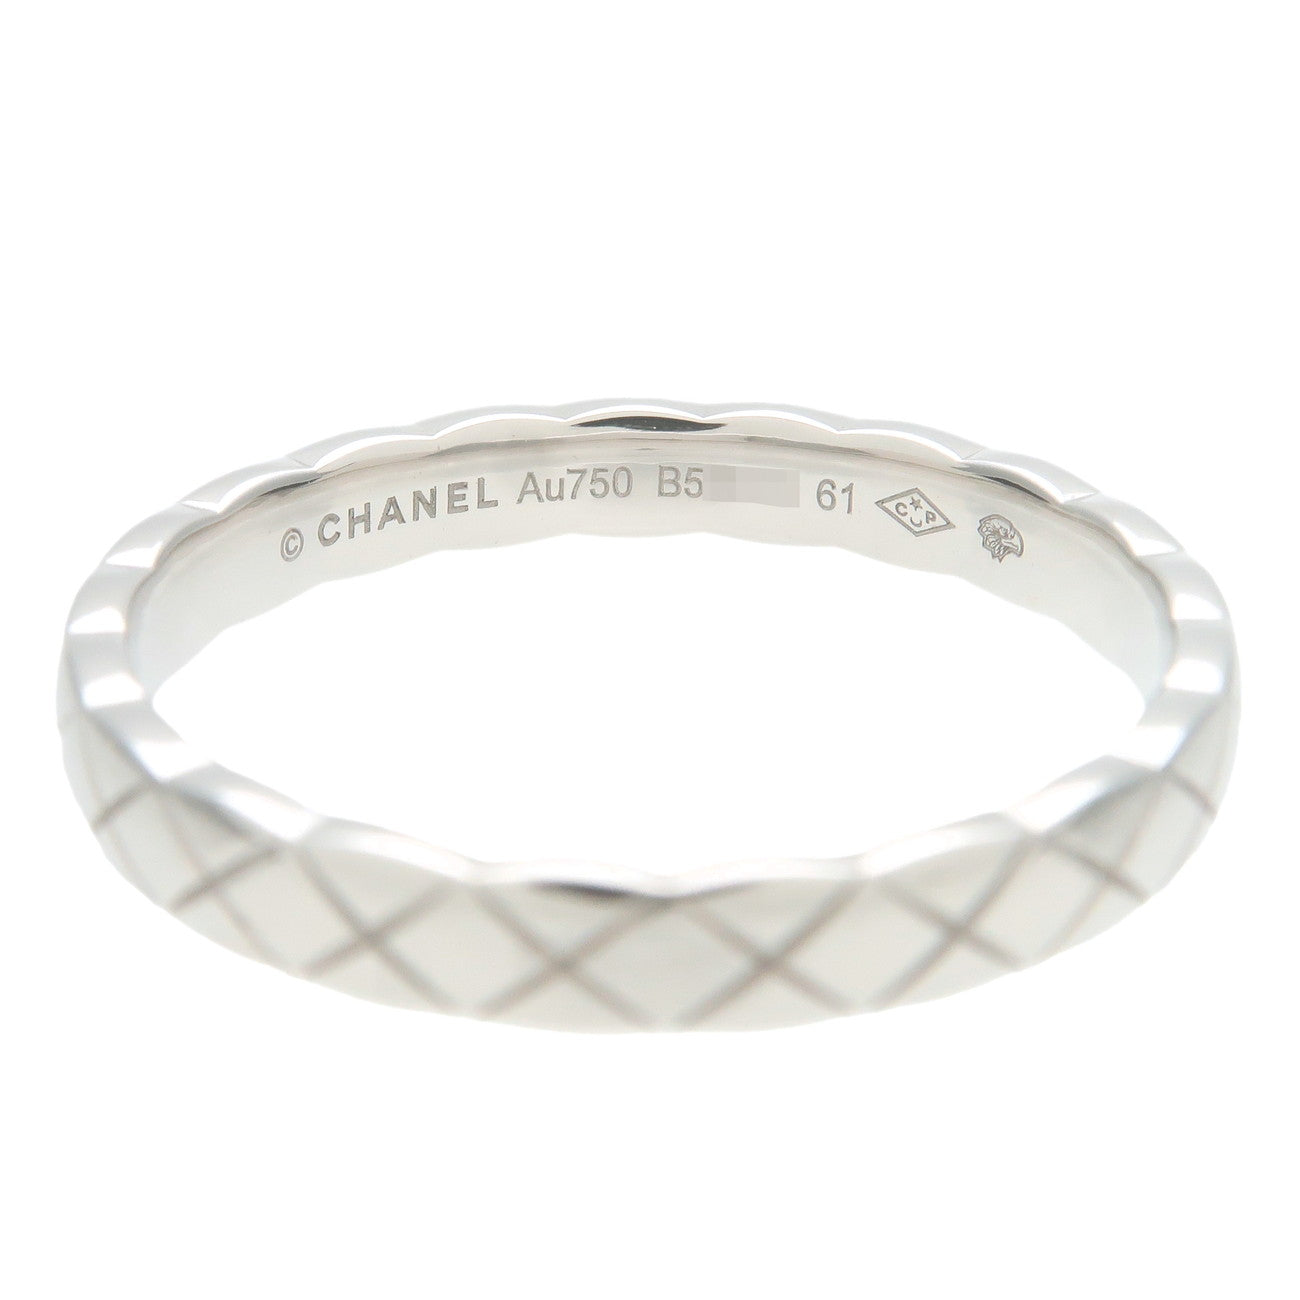 CHANEL COCO Cruch Ring Small #61 K18 750WG White Gold US 9.5